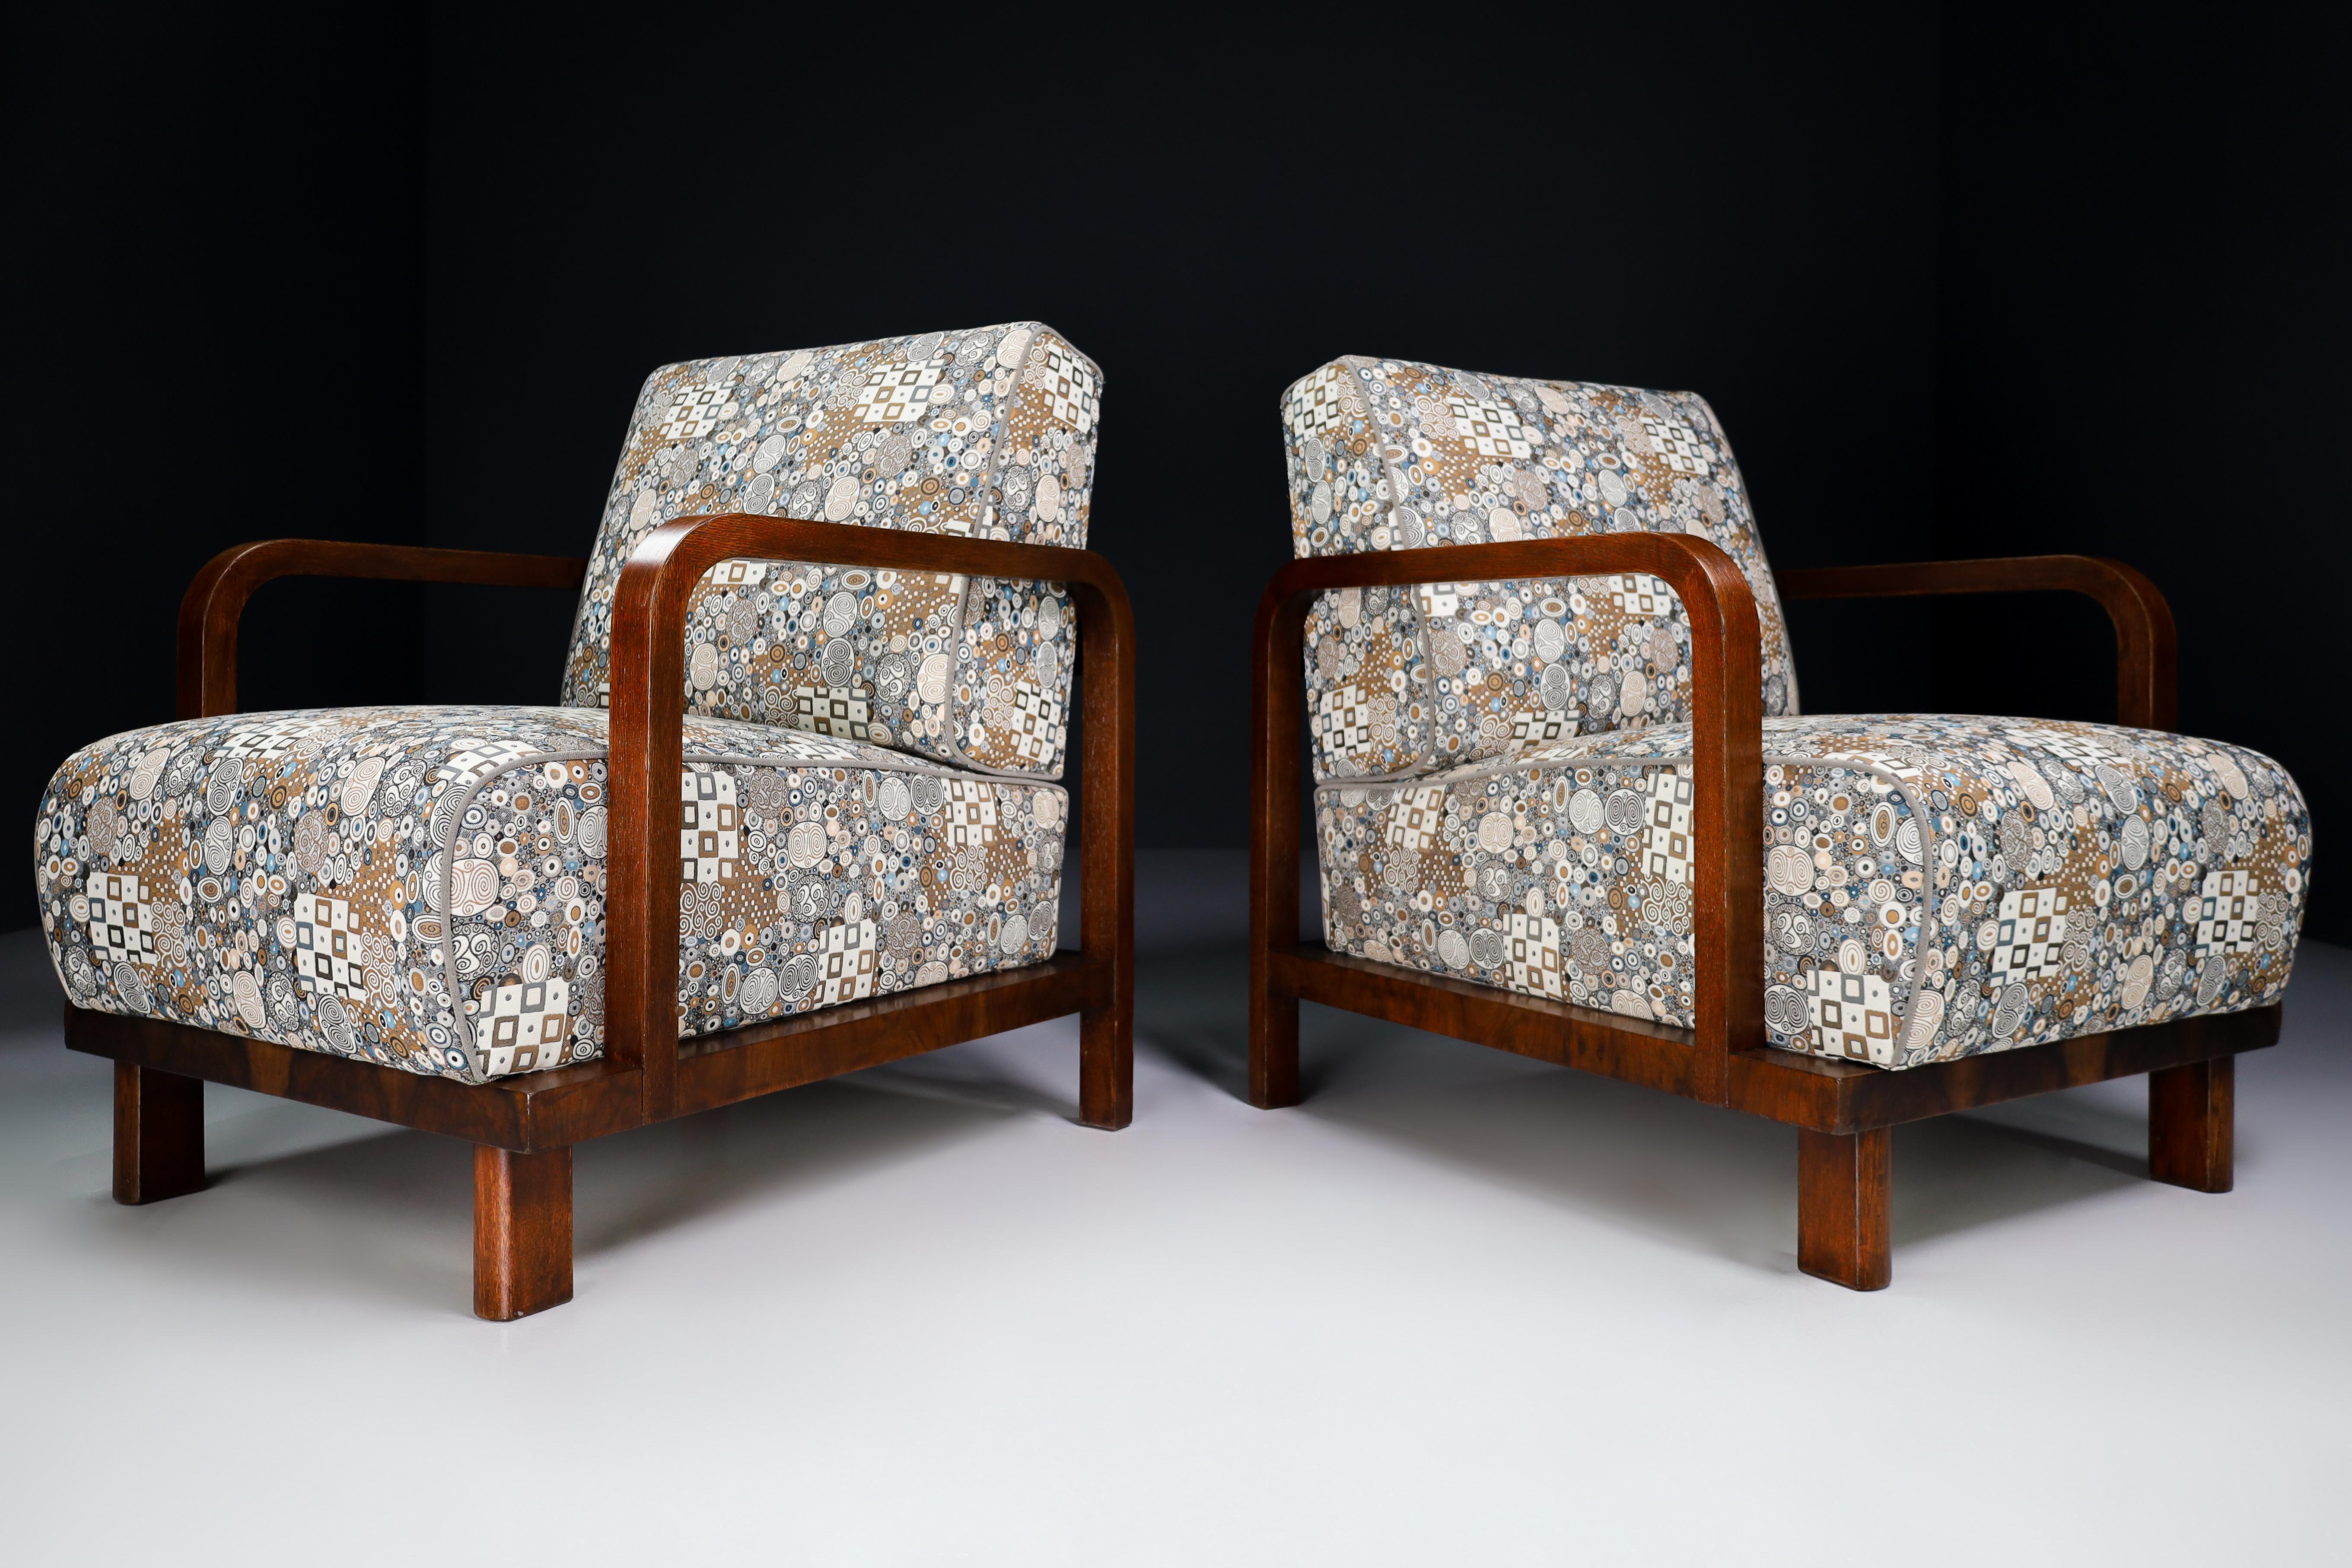 Pair of two Art-Deco lounge / arm chairs, in Oak Bentwood and Re-upholstered fabric, France, 1930s. These armchairs would make an eye-catching addition to any interior such as living room, family room, screening room or even in the office. It also